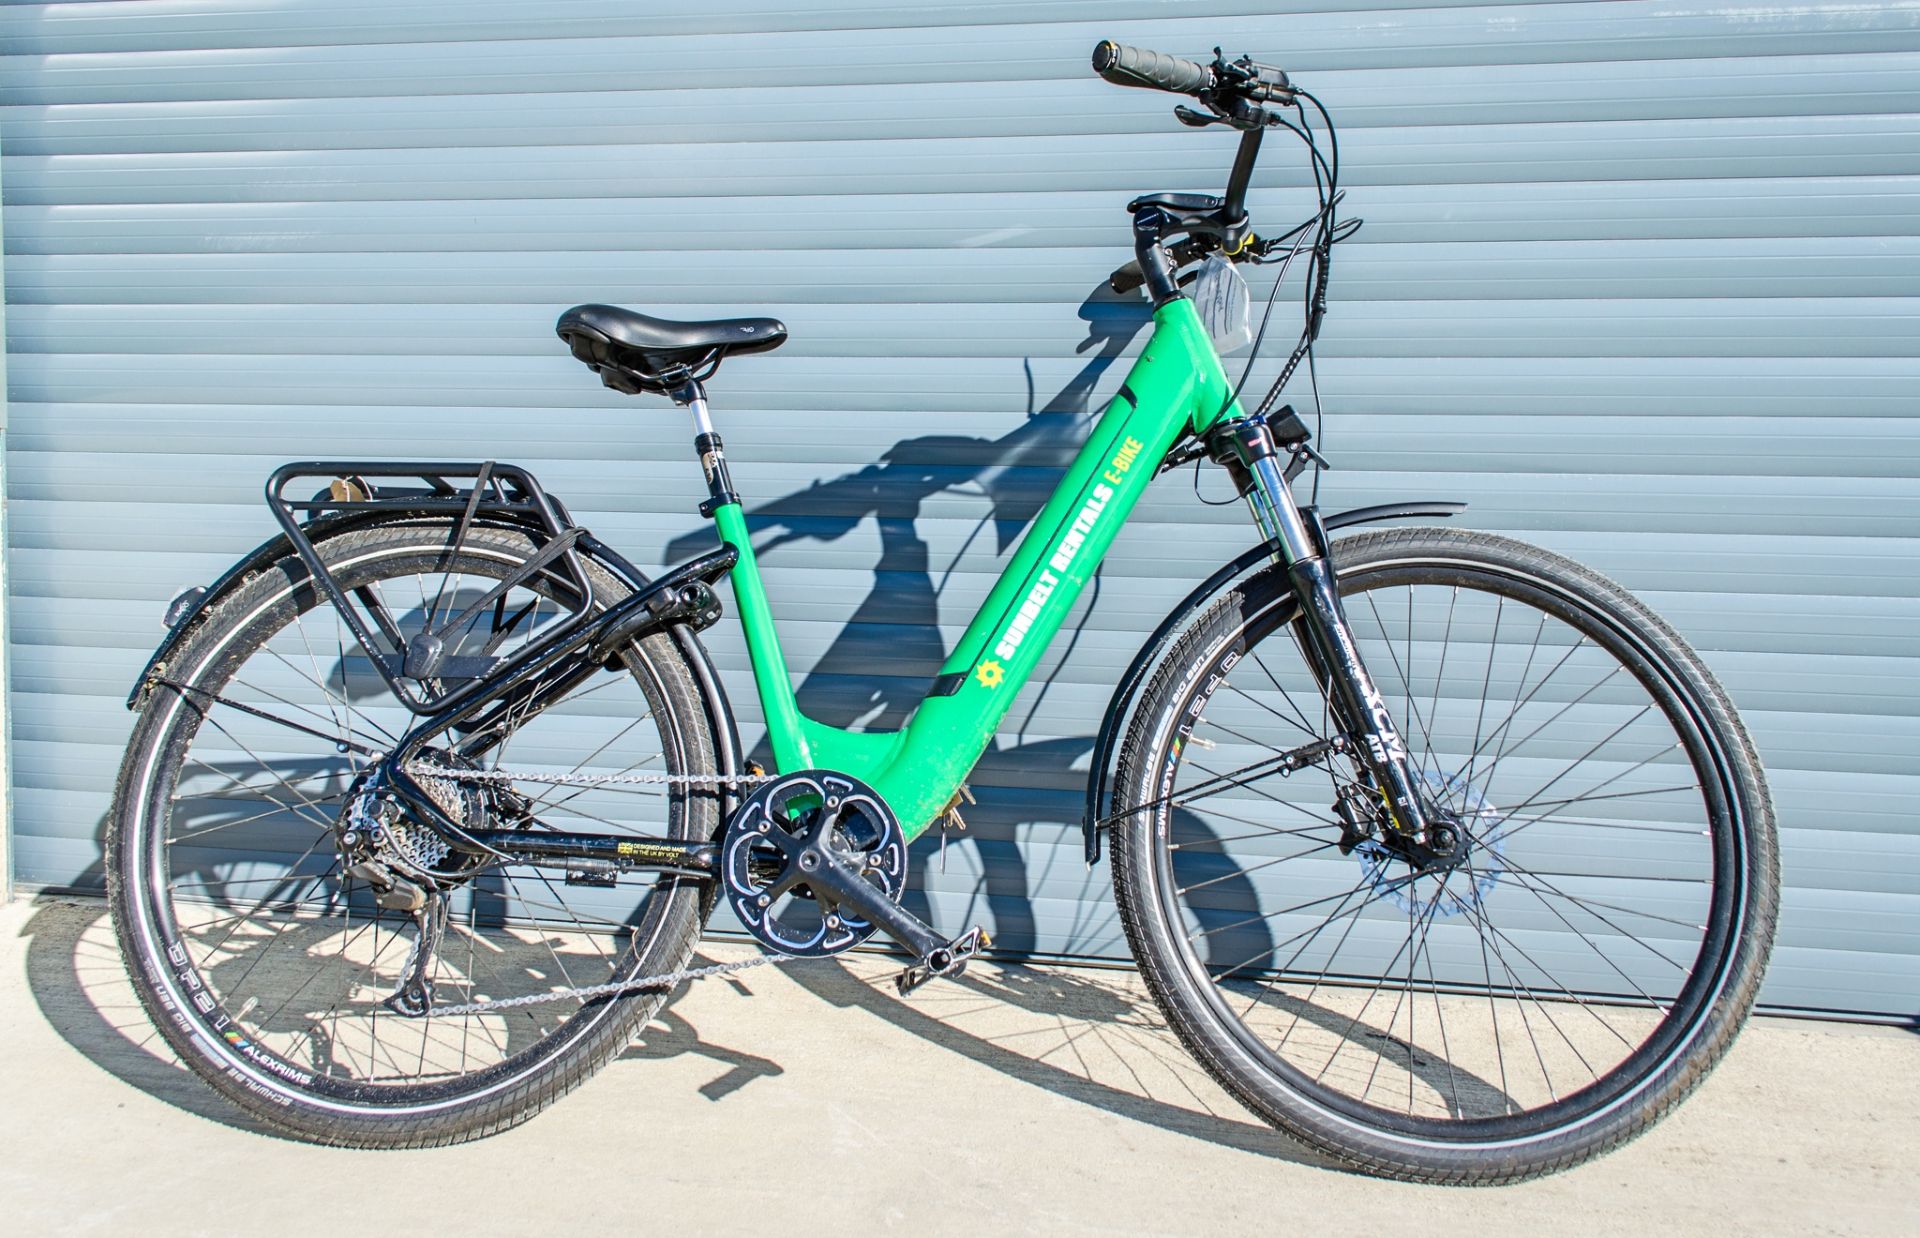 Volt Burlington e-bike Recorded Mileage: 22 c/w keys, security fob, charger & owners manual - Image 2 of 3